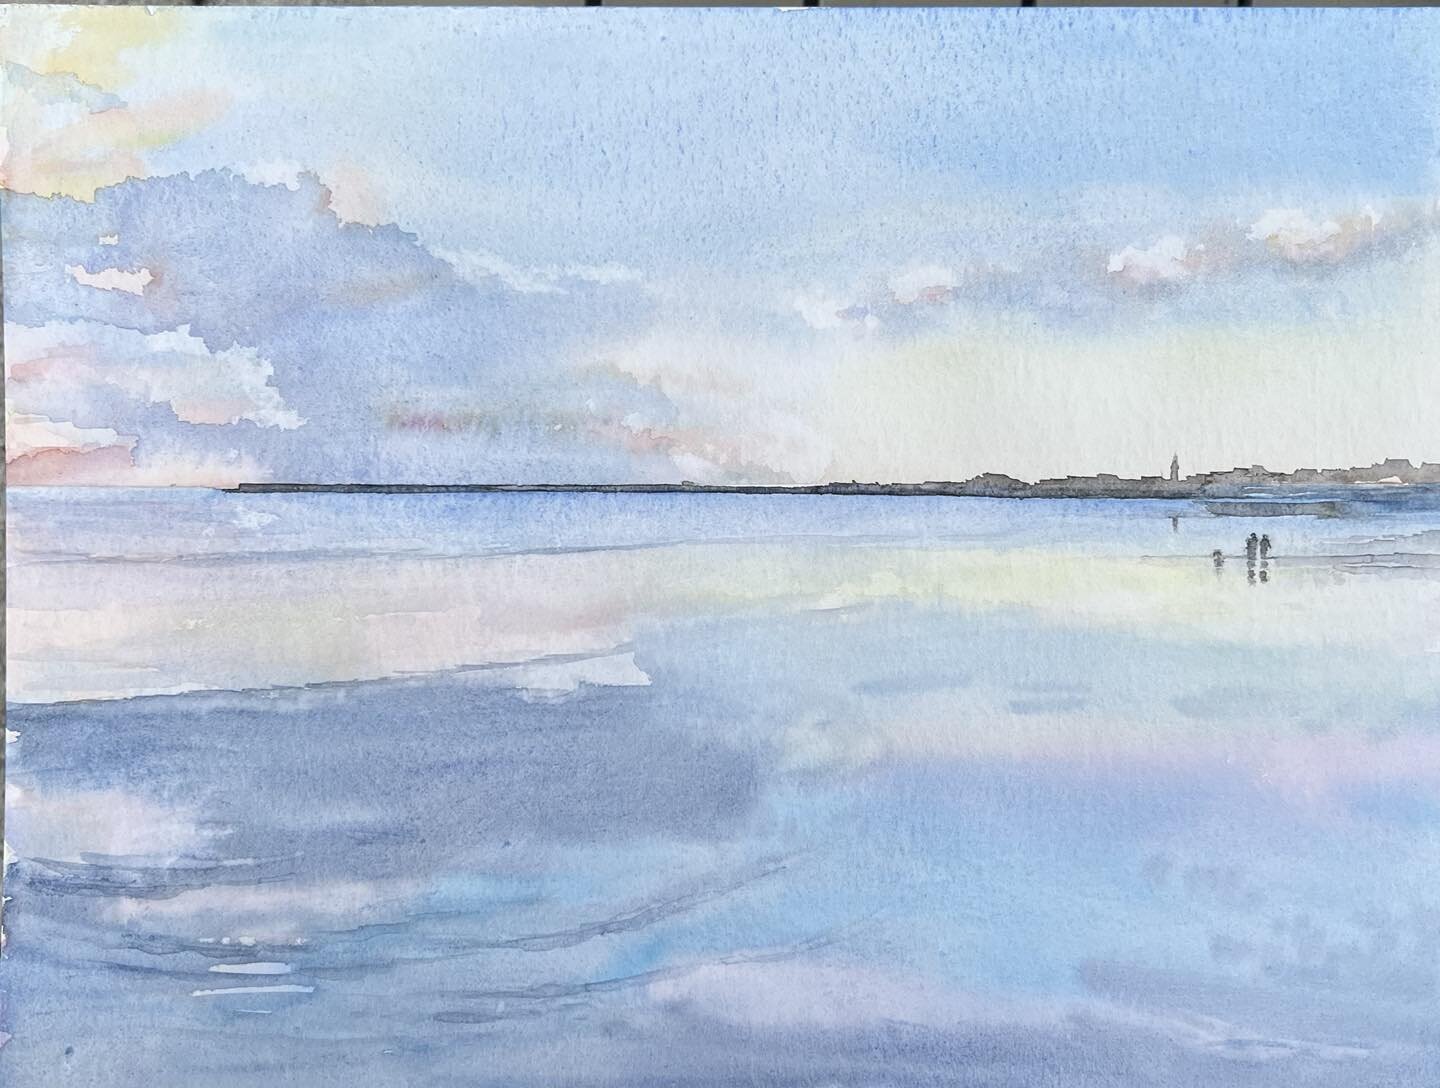 �Week 3
It&rsquo;s all about the water and the sky 💙
.
.
.

#watercolour
#watercolor
#watercolourpainting
#watercoloursocietyofireland
#shirleygiffney
#irishart
#irishartist
#irishwatercolourartist
#irishartists
#irishartoninstagram
#watercolorplane